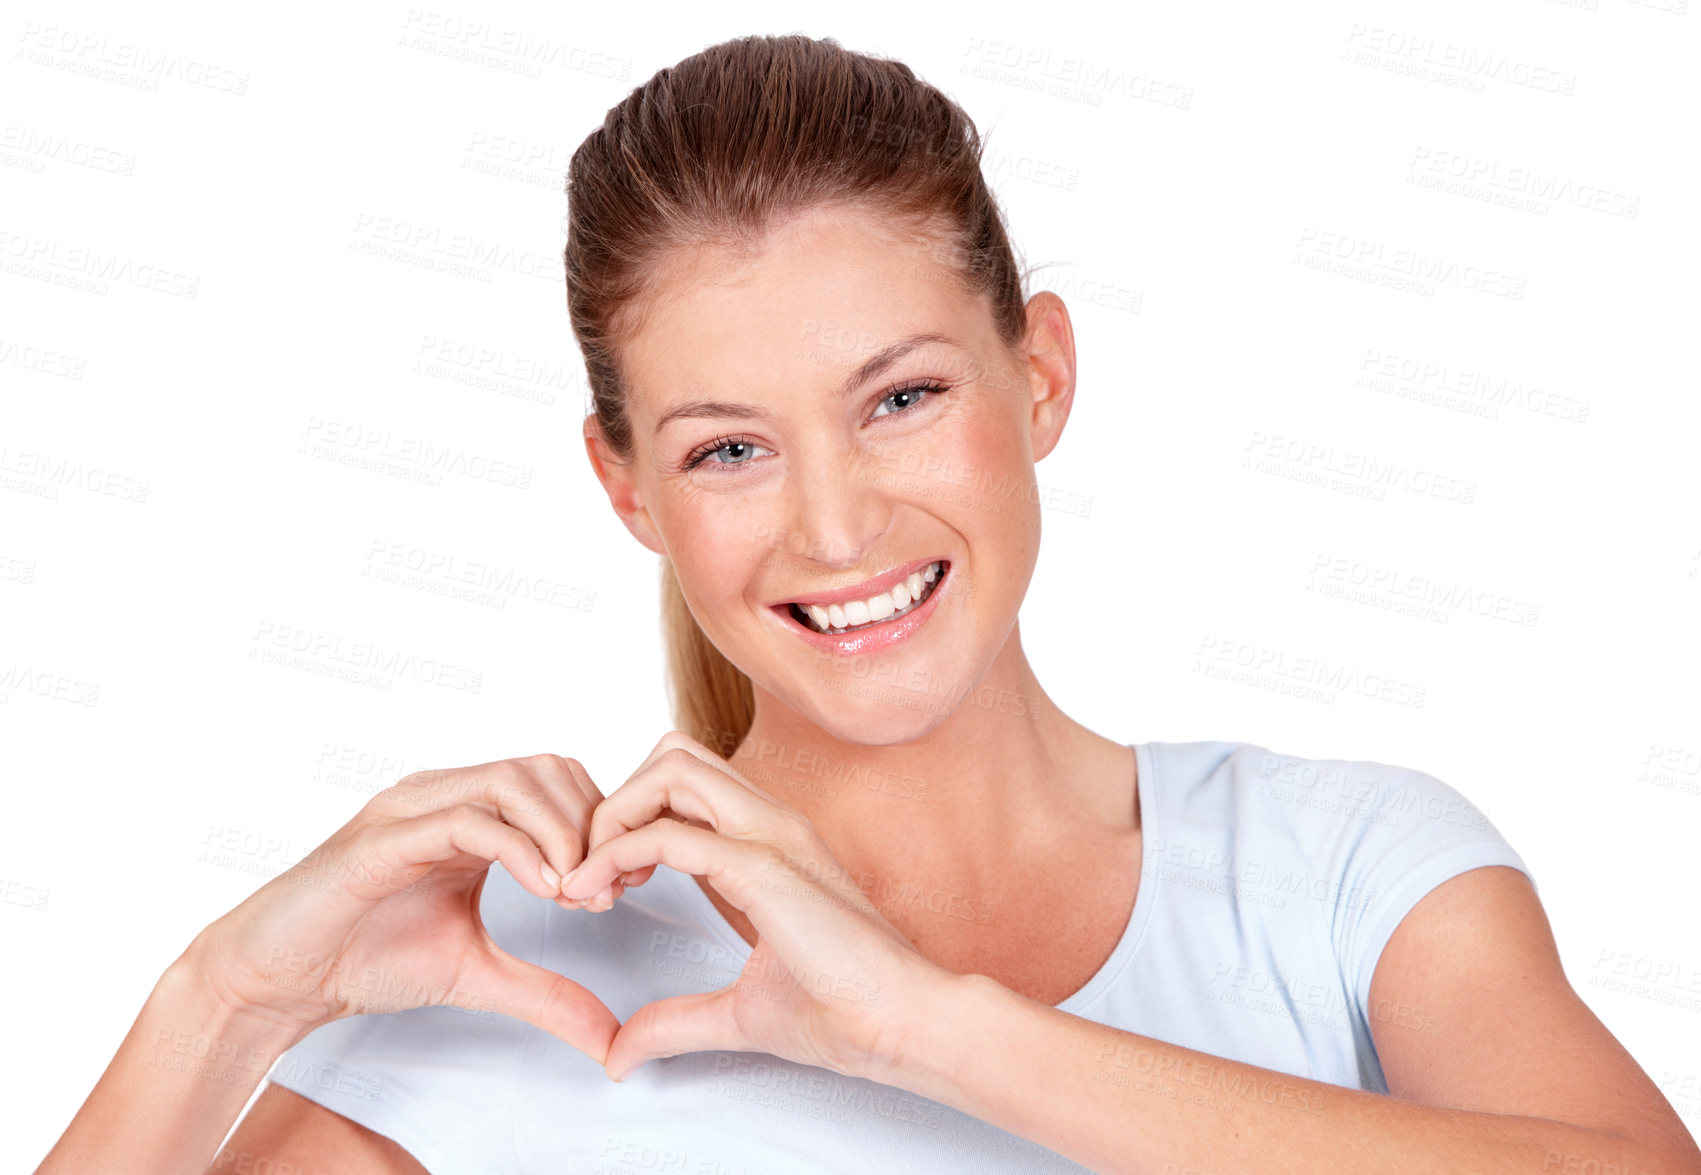 Buy stock photo Love, care and portrait of woman doing heart sign, shape or gesture with hands isolated on a white studio background. Happy, casual and female person with happiness, care and kindness signal